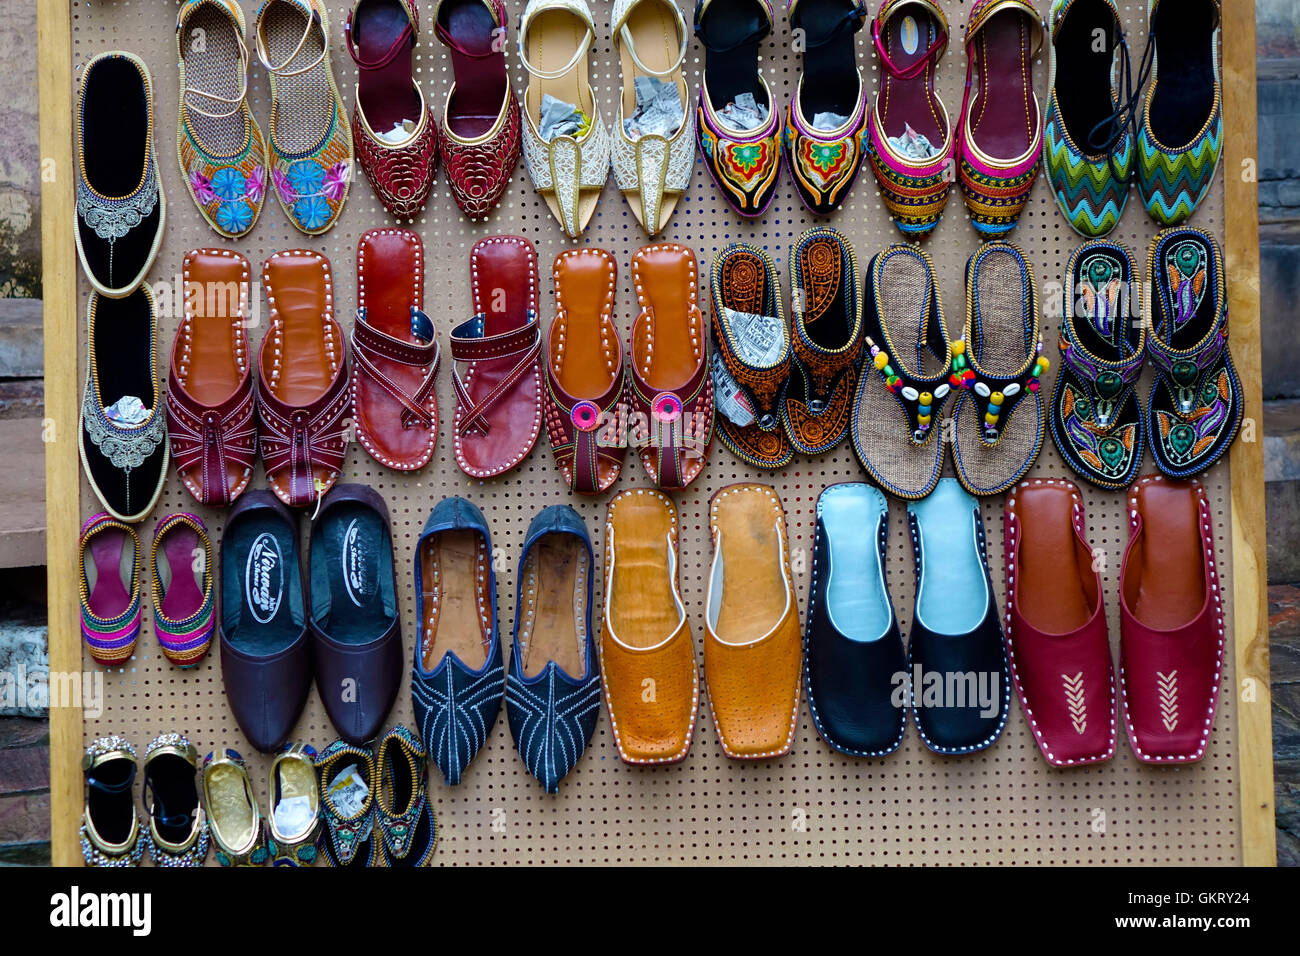 Colorful Indian shoes for sale Stock Photo